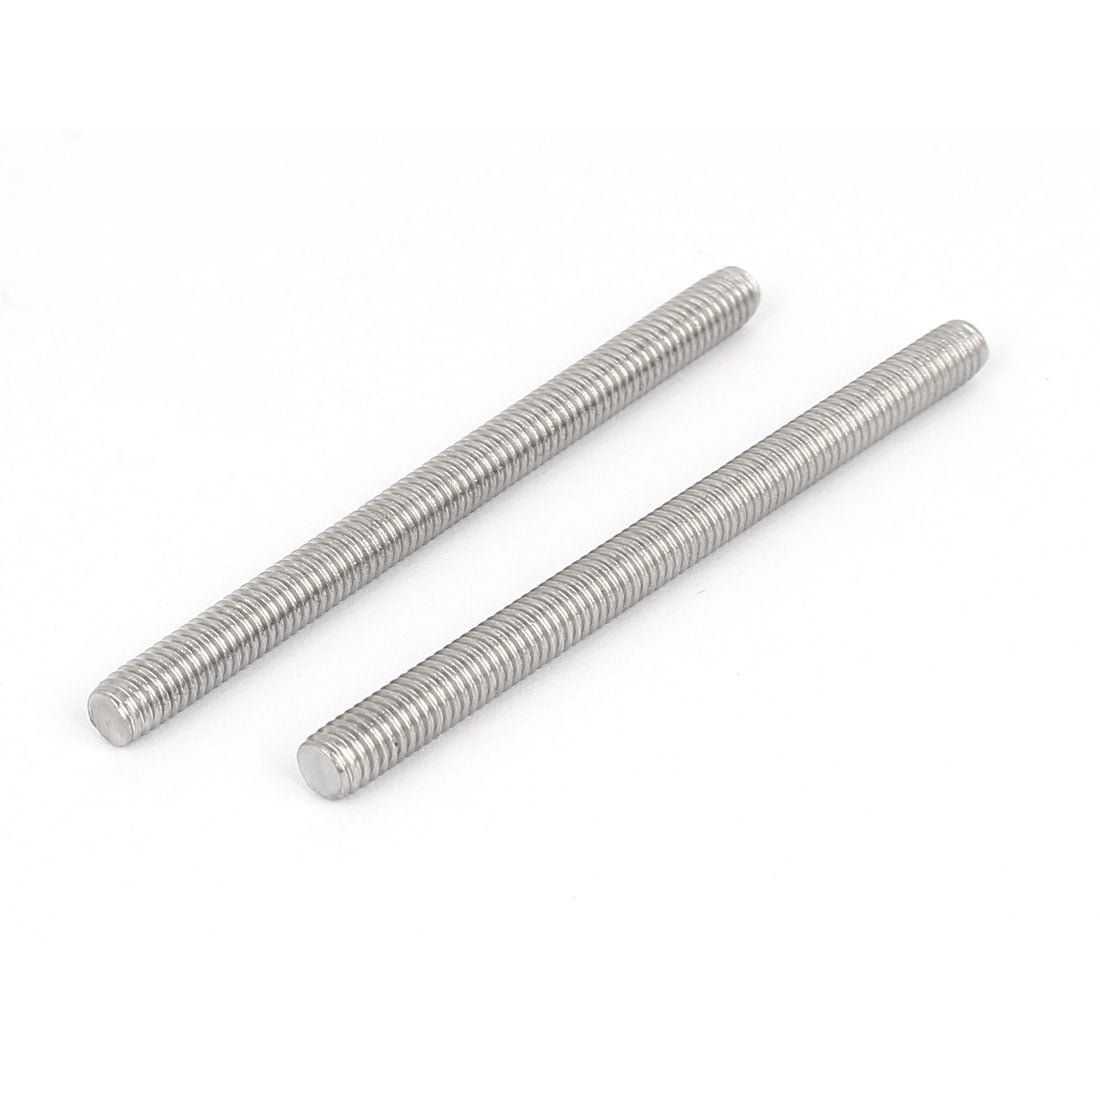 20 both ends  304 8 1/2" Long  1 Pc 3/4" Stainless  Steel Shaft   Tapped 1/2" 